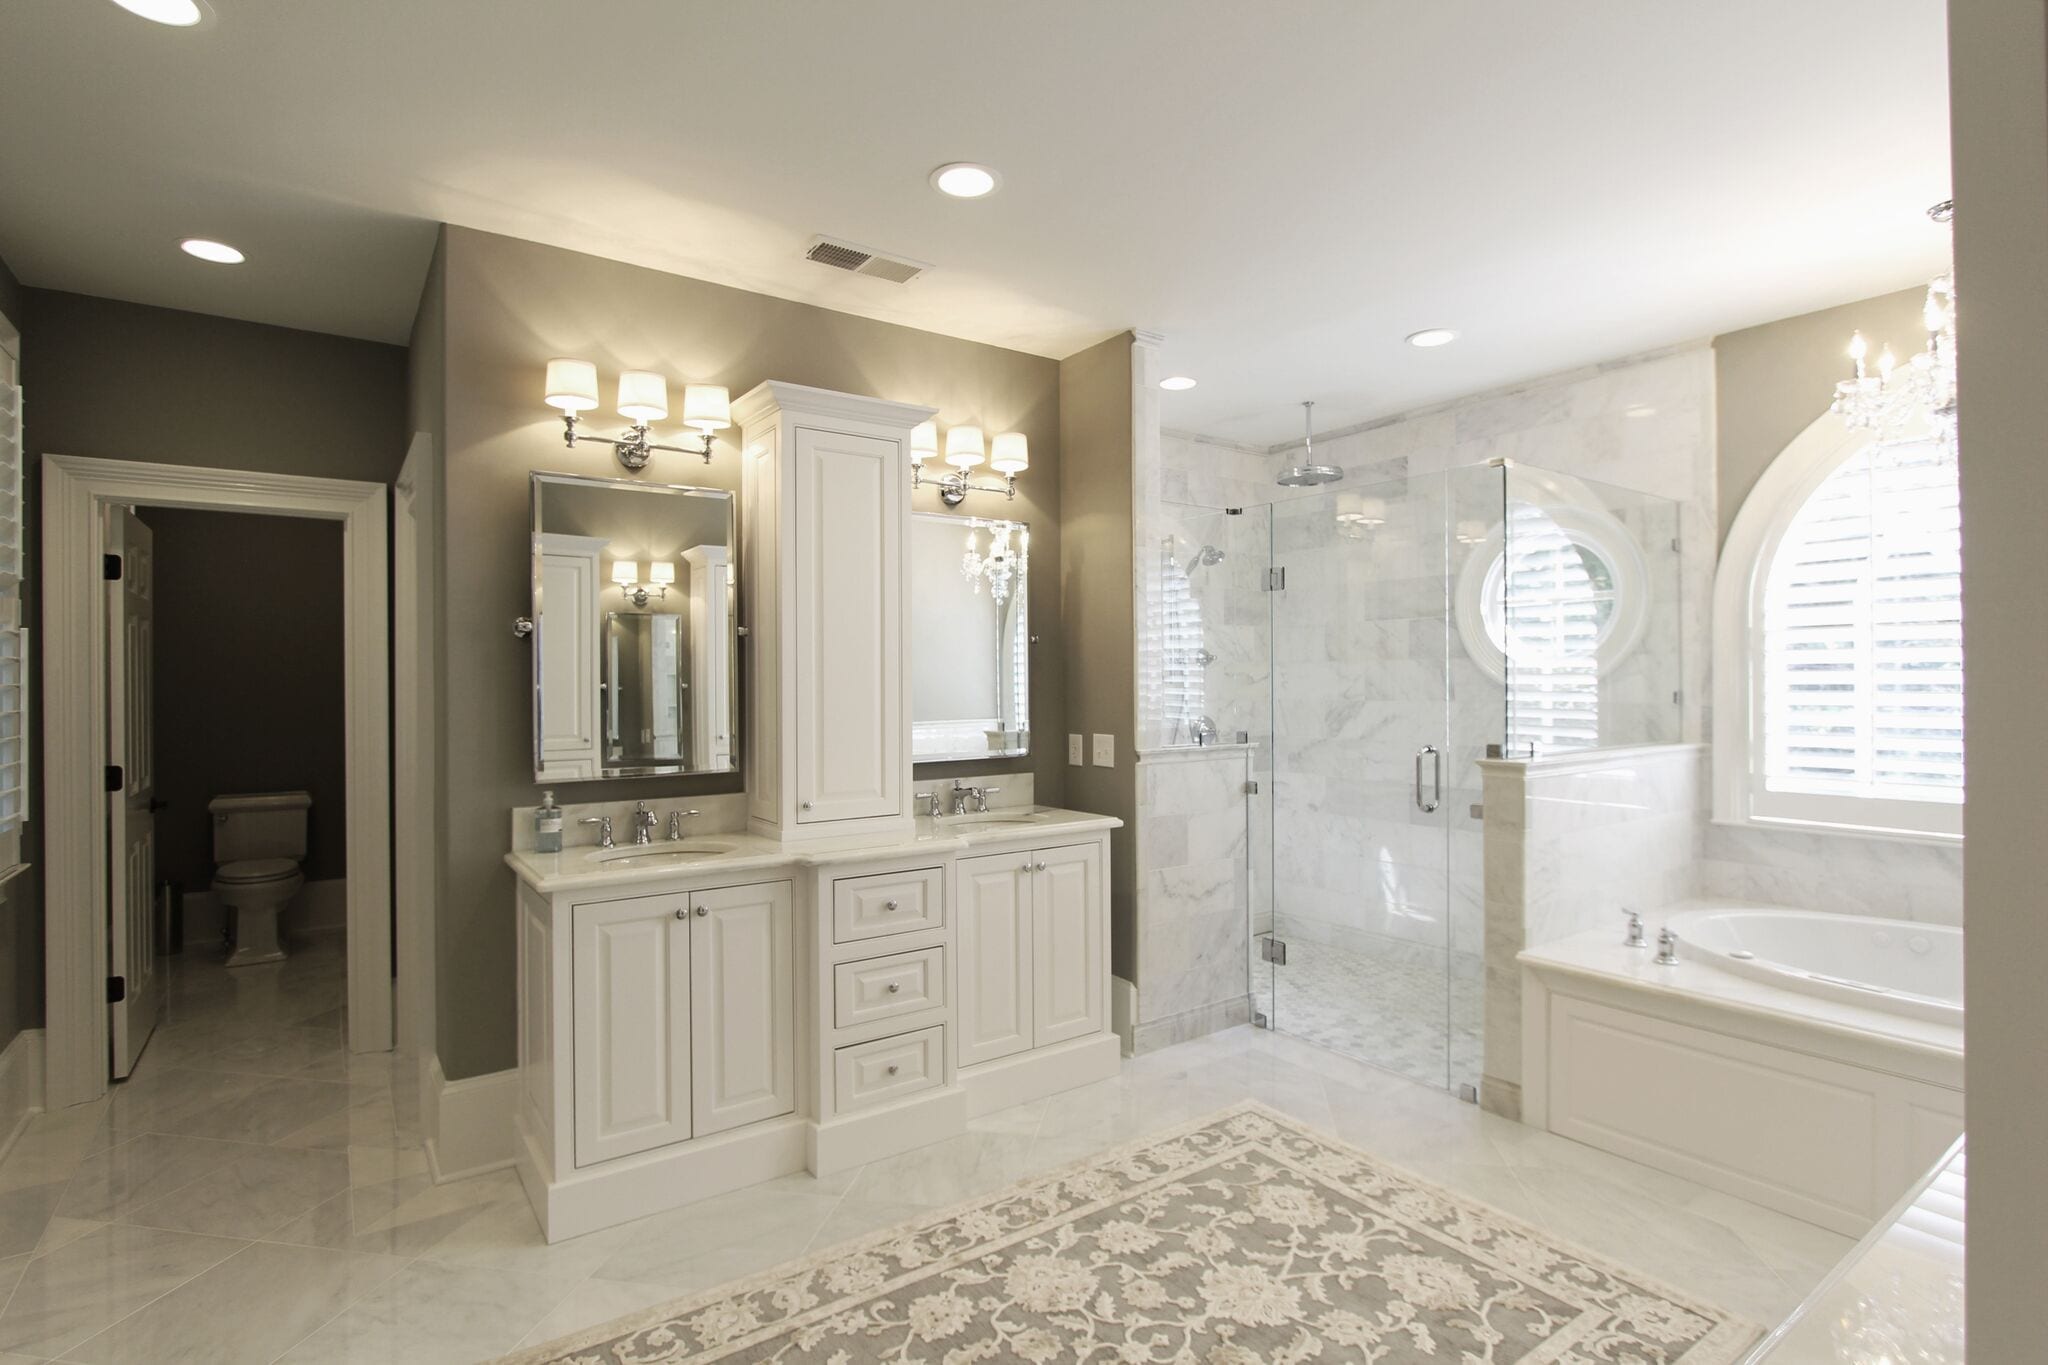 Bathroom Double Vanity With Center Tower